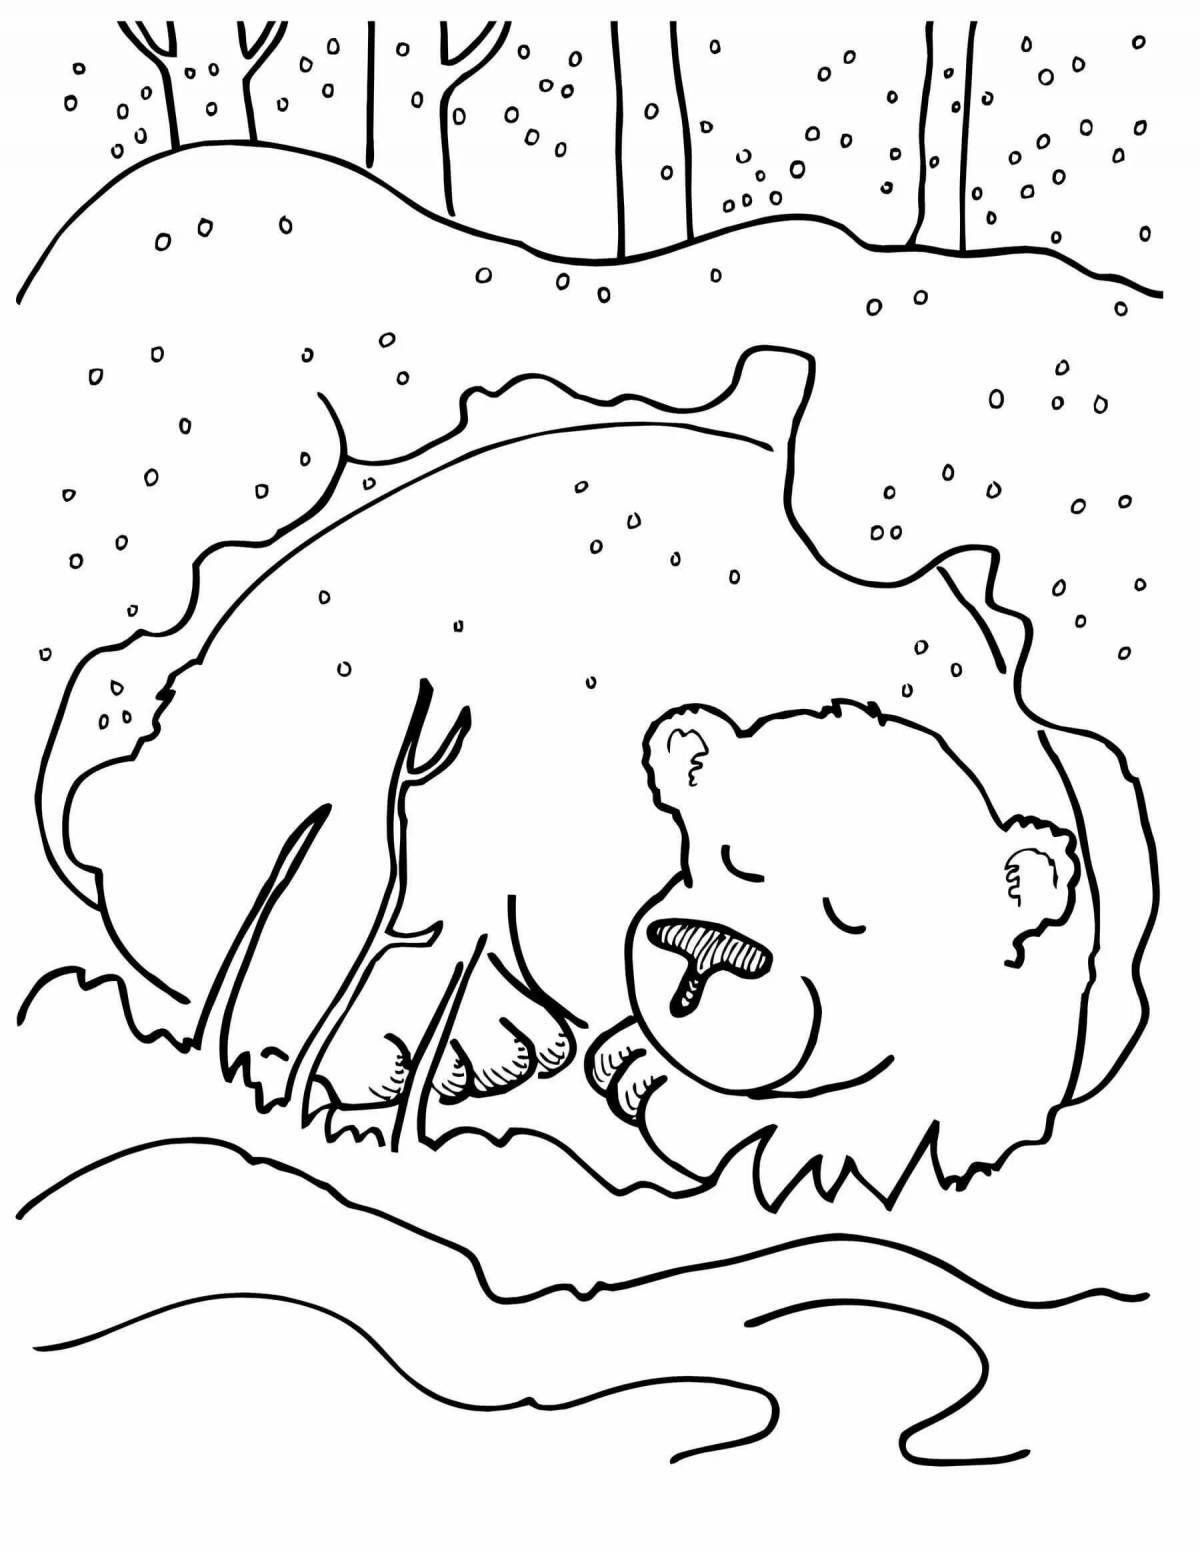 Glitter animal coloring pages for kids in winter